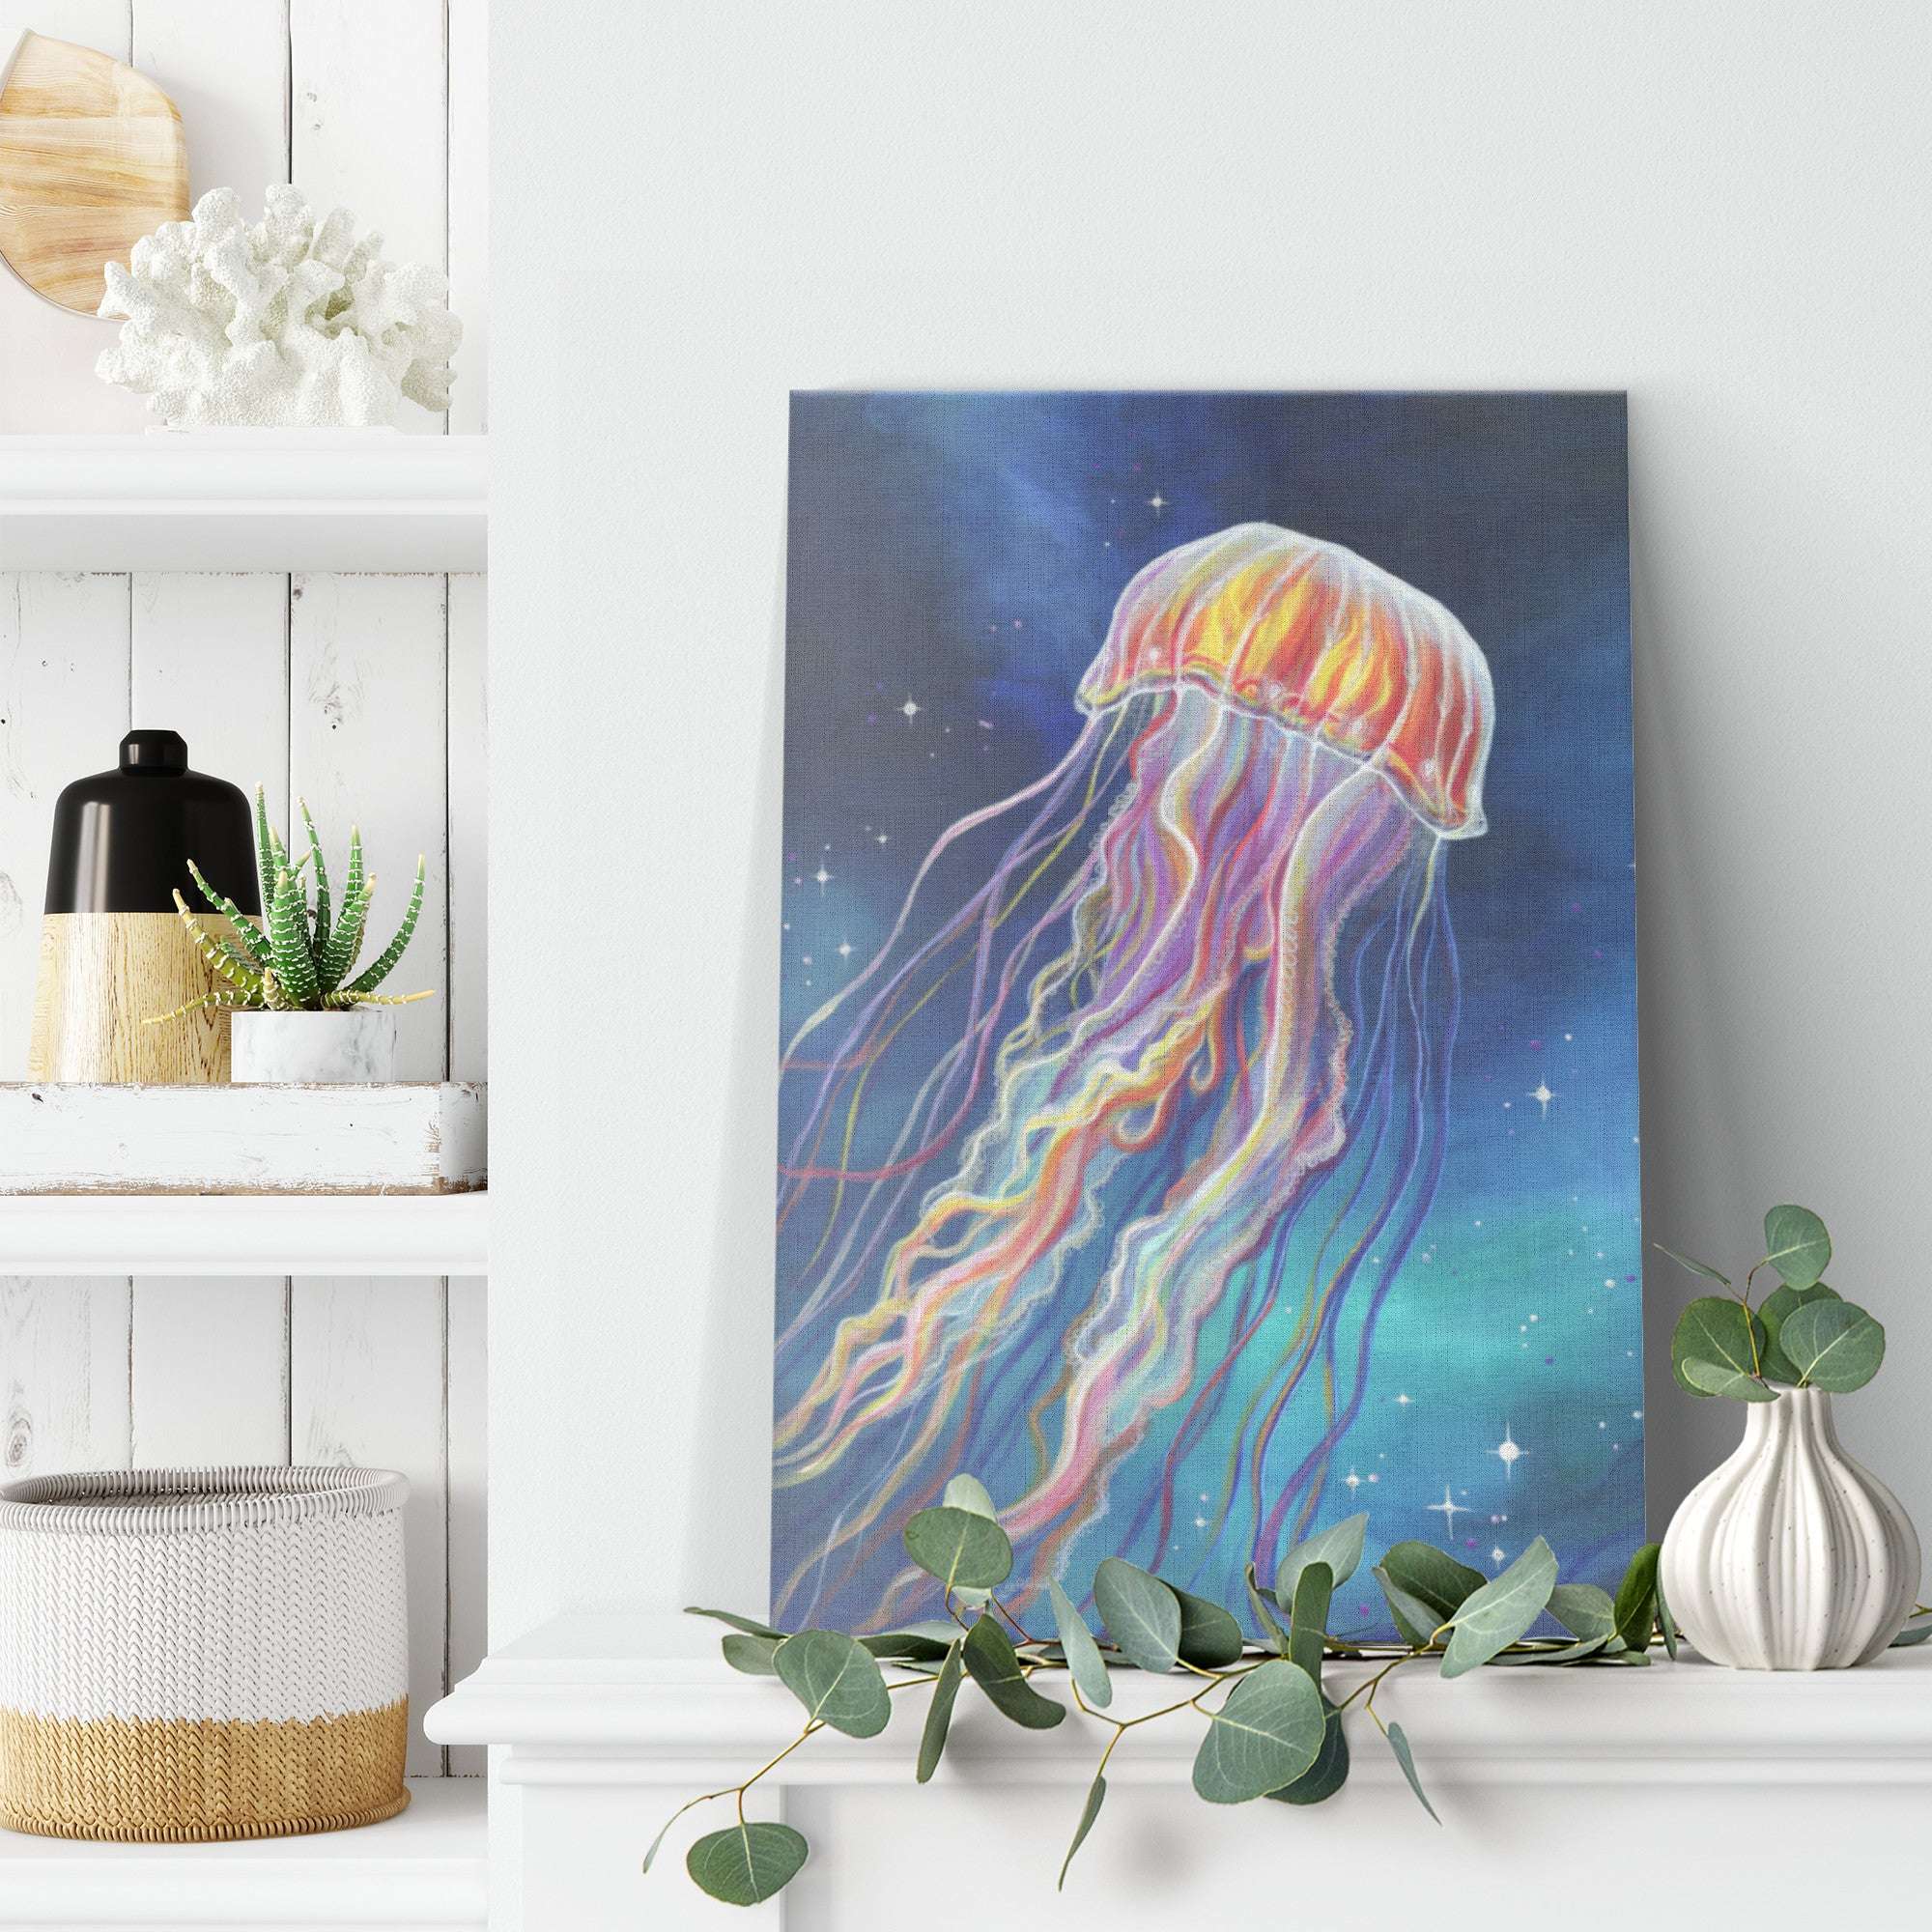 A jellyfish canvas art print, displayed on a white shelf alongside decorative items, in a bright, modern room.